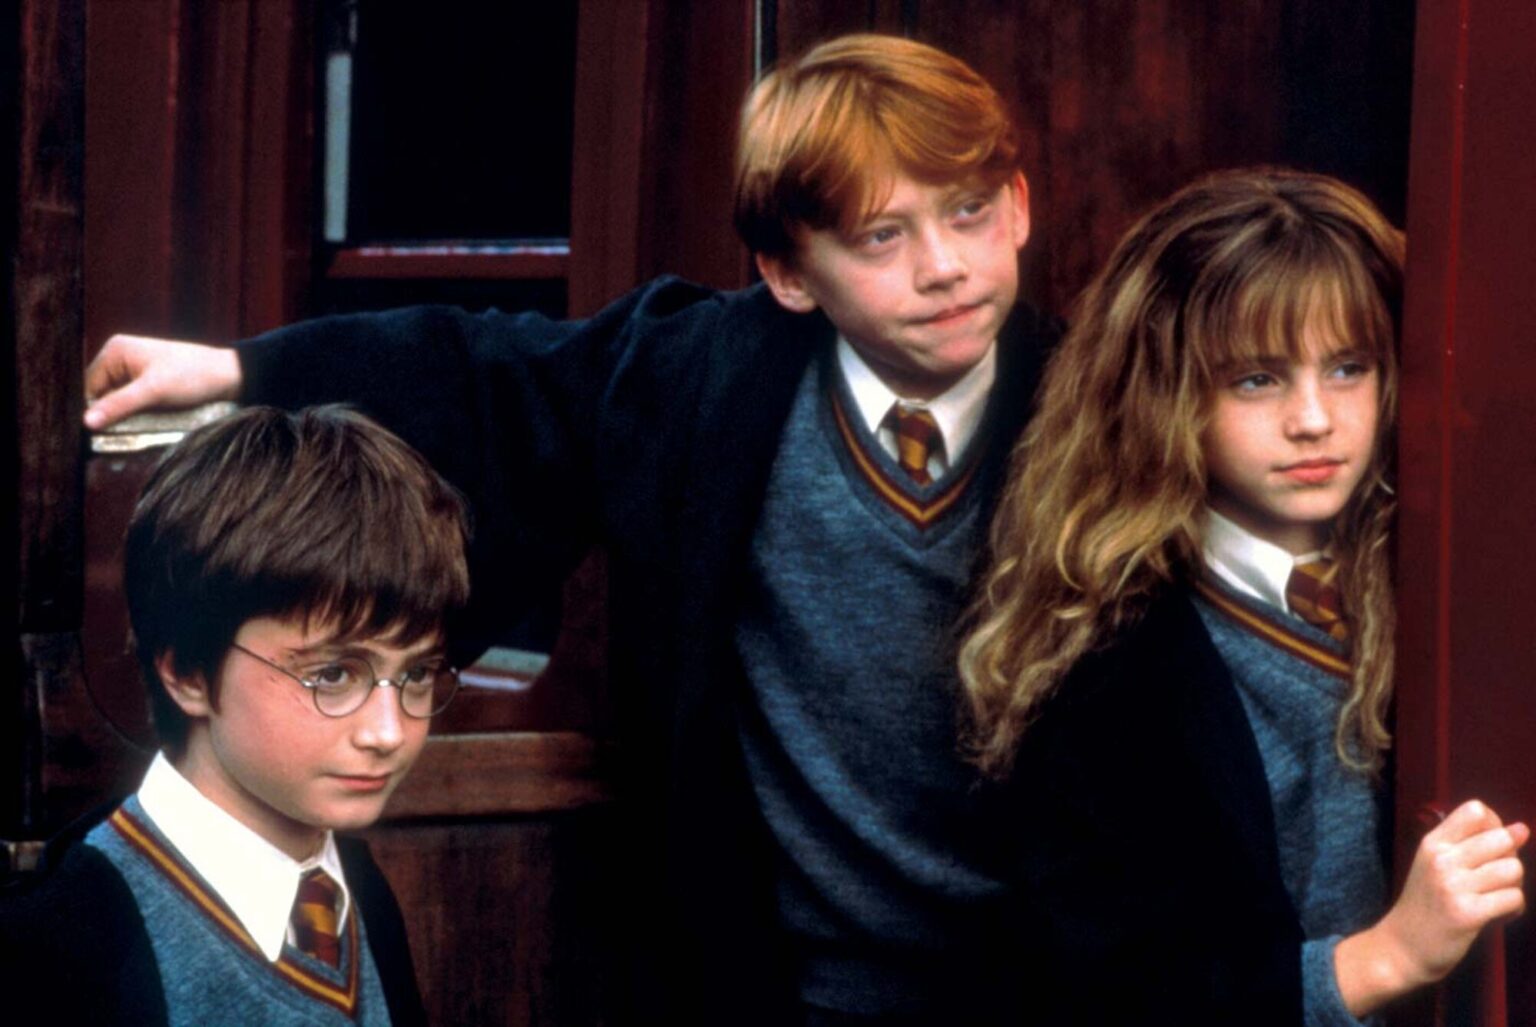 The 'Harry Potter' film series is finally back on HBO Max. Find out why it left in the first place here, and how long they'll be sticking around this time.